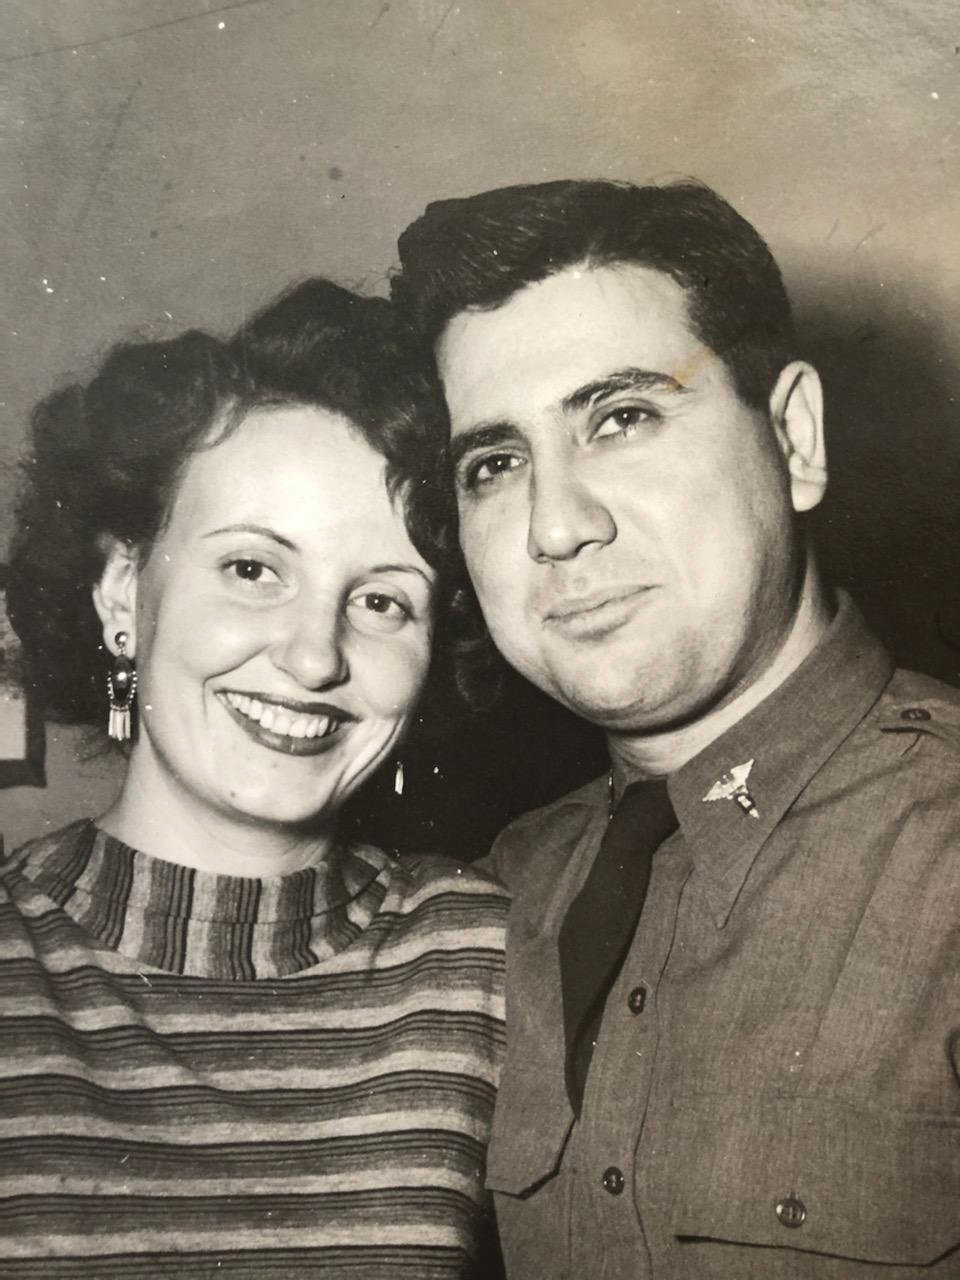 For 75 years of marriage, Dr. Angelo Eugene Prisco and Myrtle Prisco have been the picture of love. God has blessed their union abundantly: “You rely on Him for everything and He always comes through,” Mrs. Prisco said.